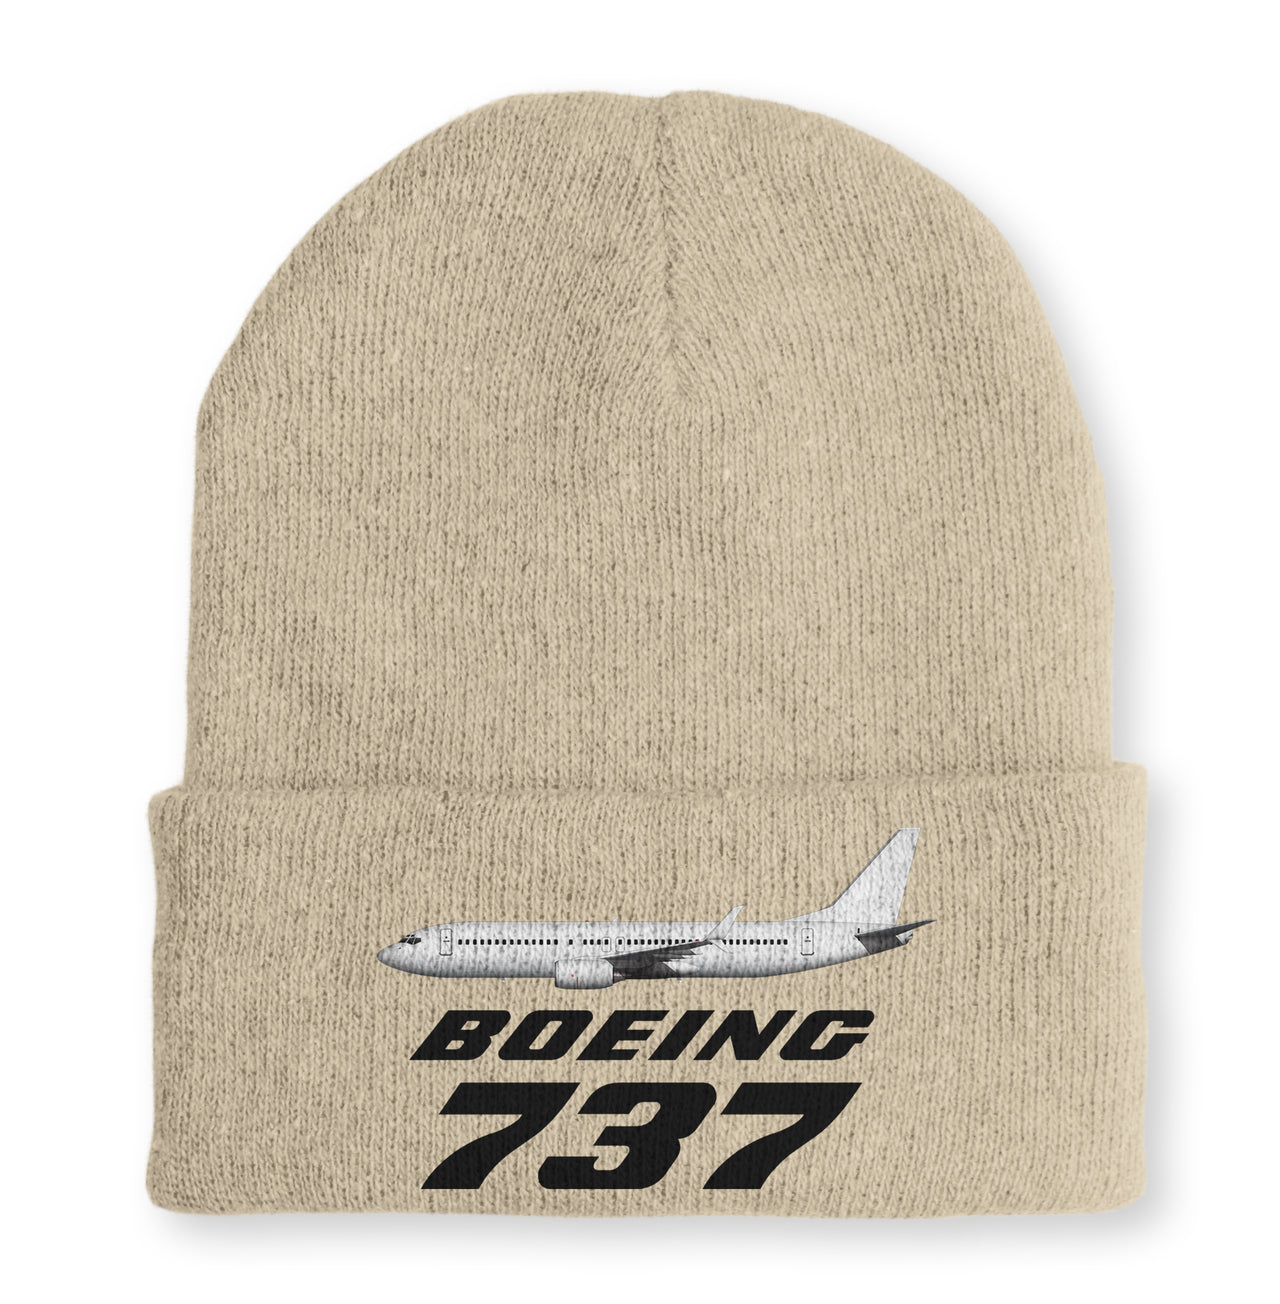 The Boeing 737 Embroidered Beanies